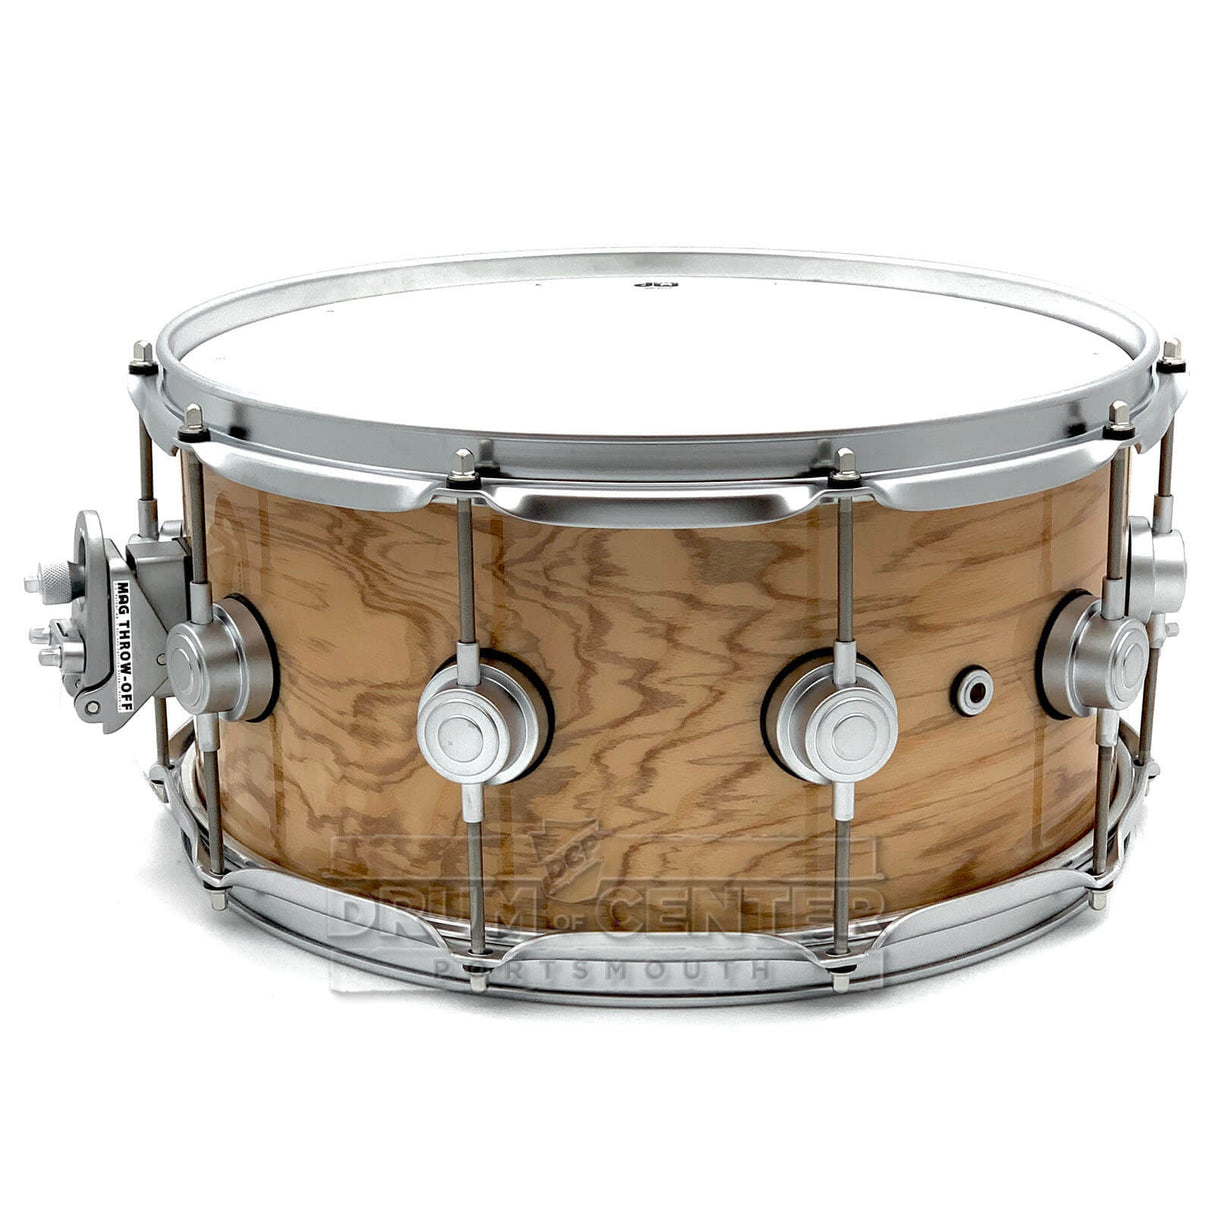 DW Collectors SSC Maple Snare Drum 14x6.5 Exotic Olive Ash Burl w/Satin Chrome Hardware - Drum Center Of Portsmouth